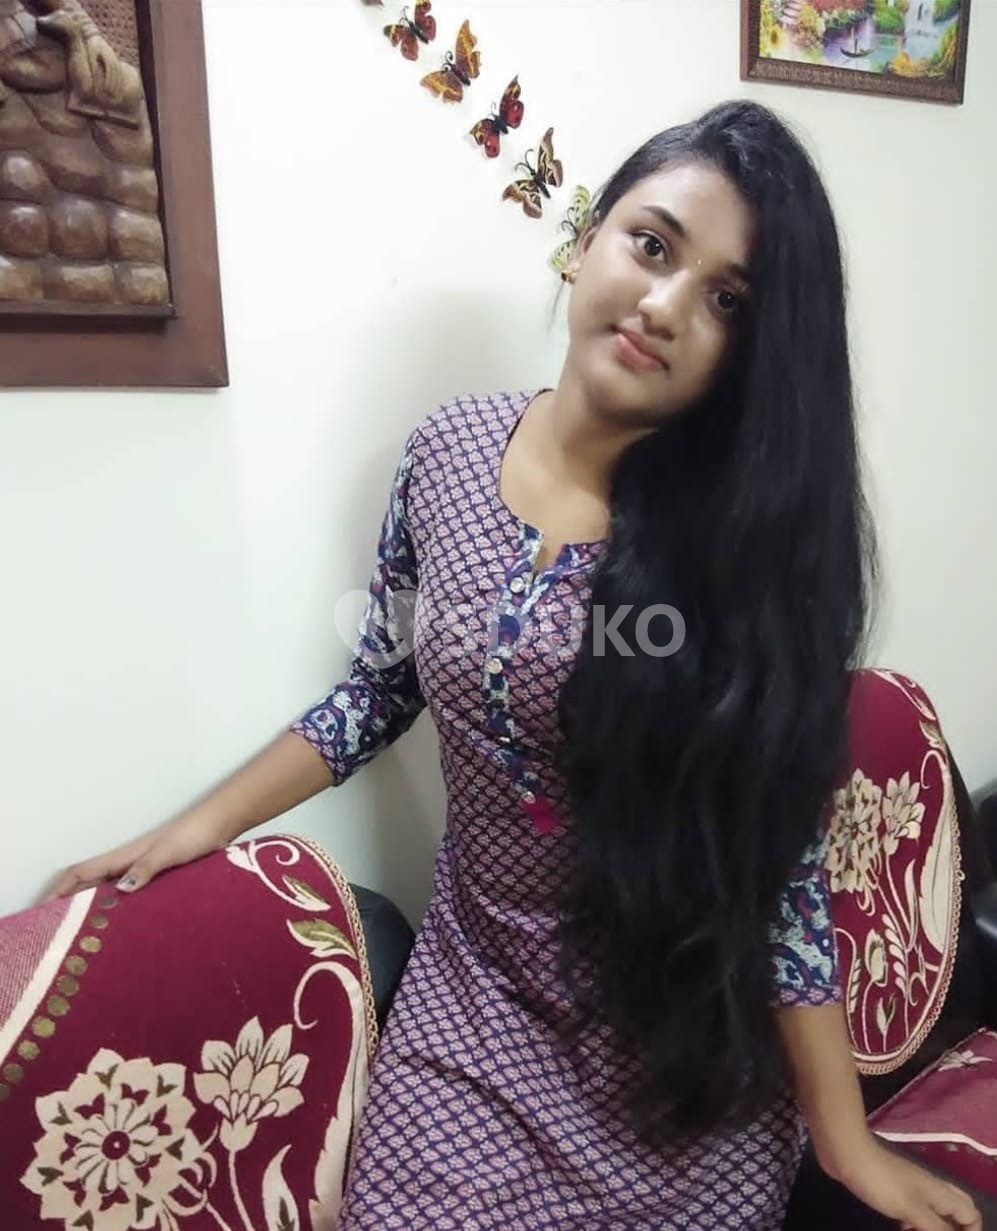 YELAHANKA 💯% FULLY SATISFACTION AND DOORSTEP INCALL OUTCALL SERVICE AVAILABLE SAFE AND SECURE